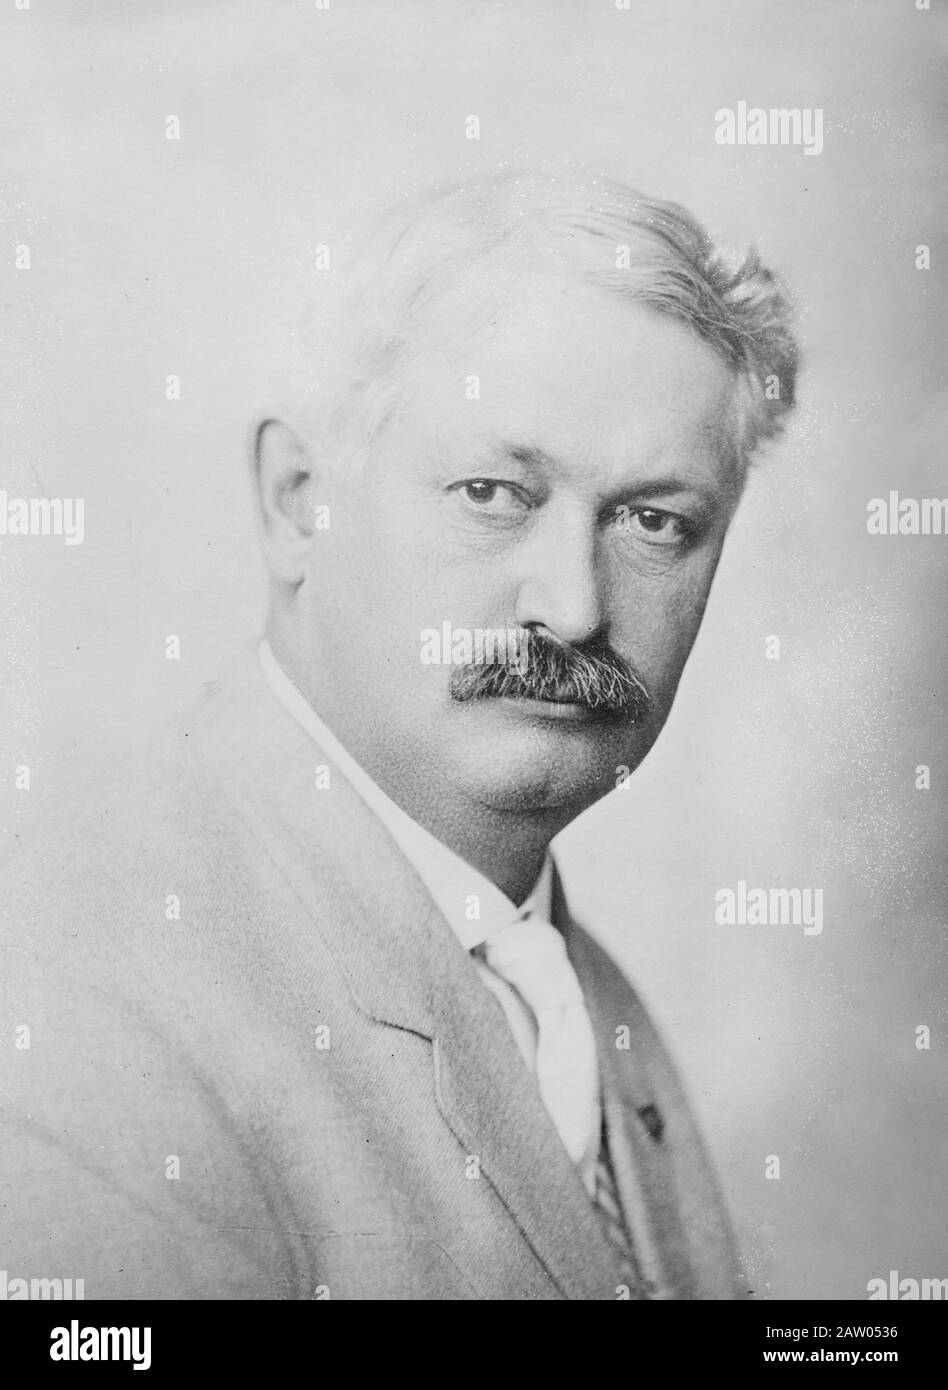 Photo shows Everett Chamberlin Benton, Massachusetts politician and Republican candidate for governor, 1912. Stock Photo